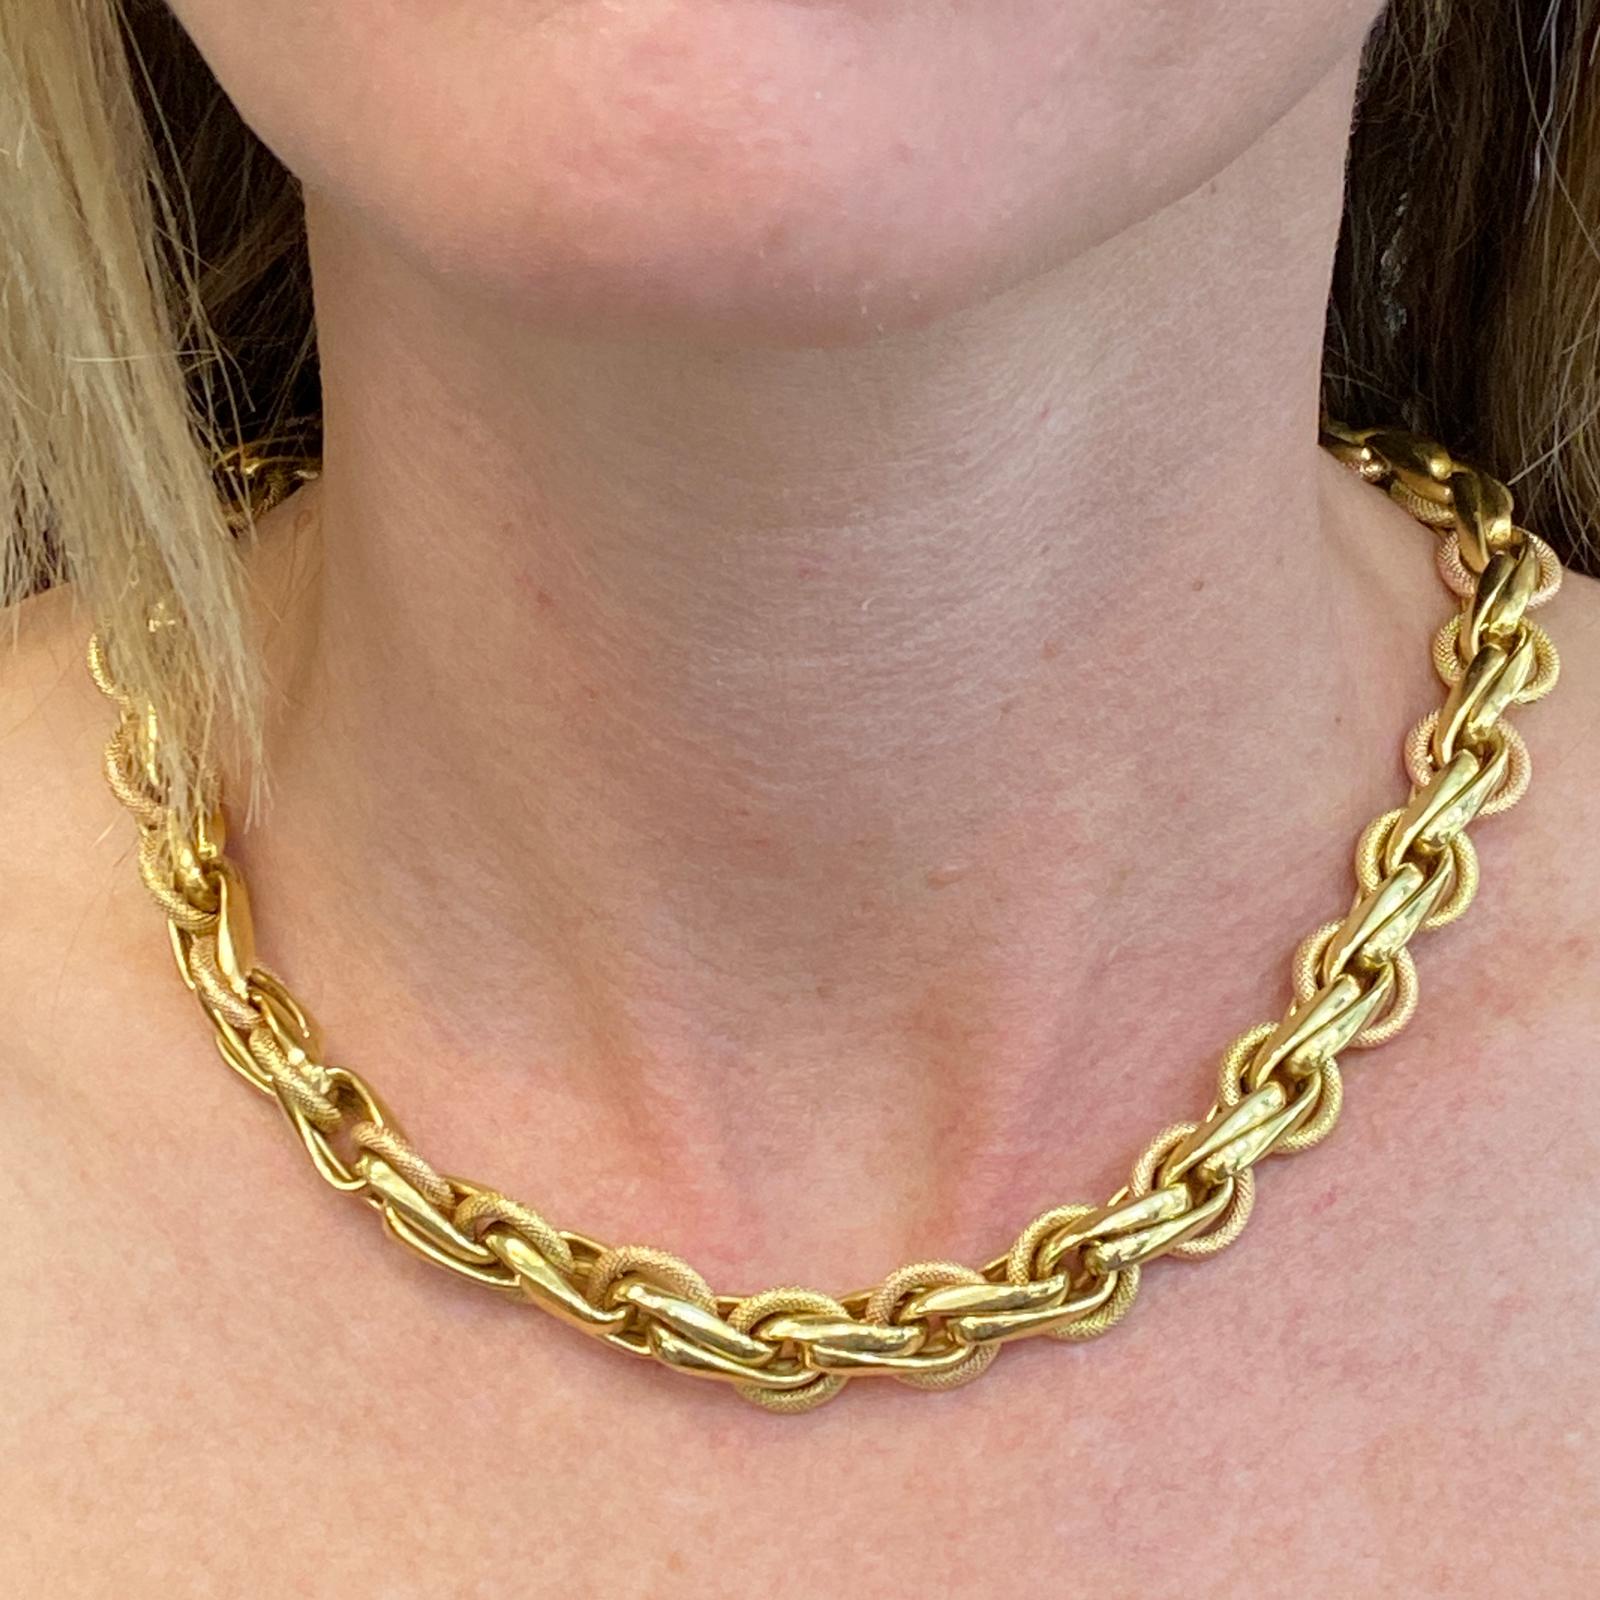 Textured vintage link necklace fashioned in 18 karat yellow and rose gold. The link necklace features high polish yellow gold and textured rose gold links with a cabochon lapis lazuli gemstone clasp. The necklace measures 17 inches in length and